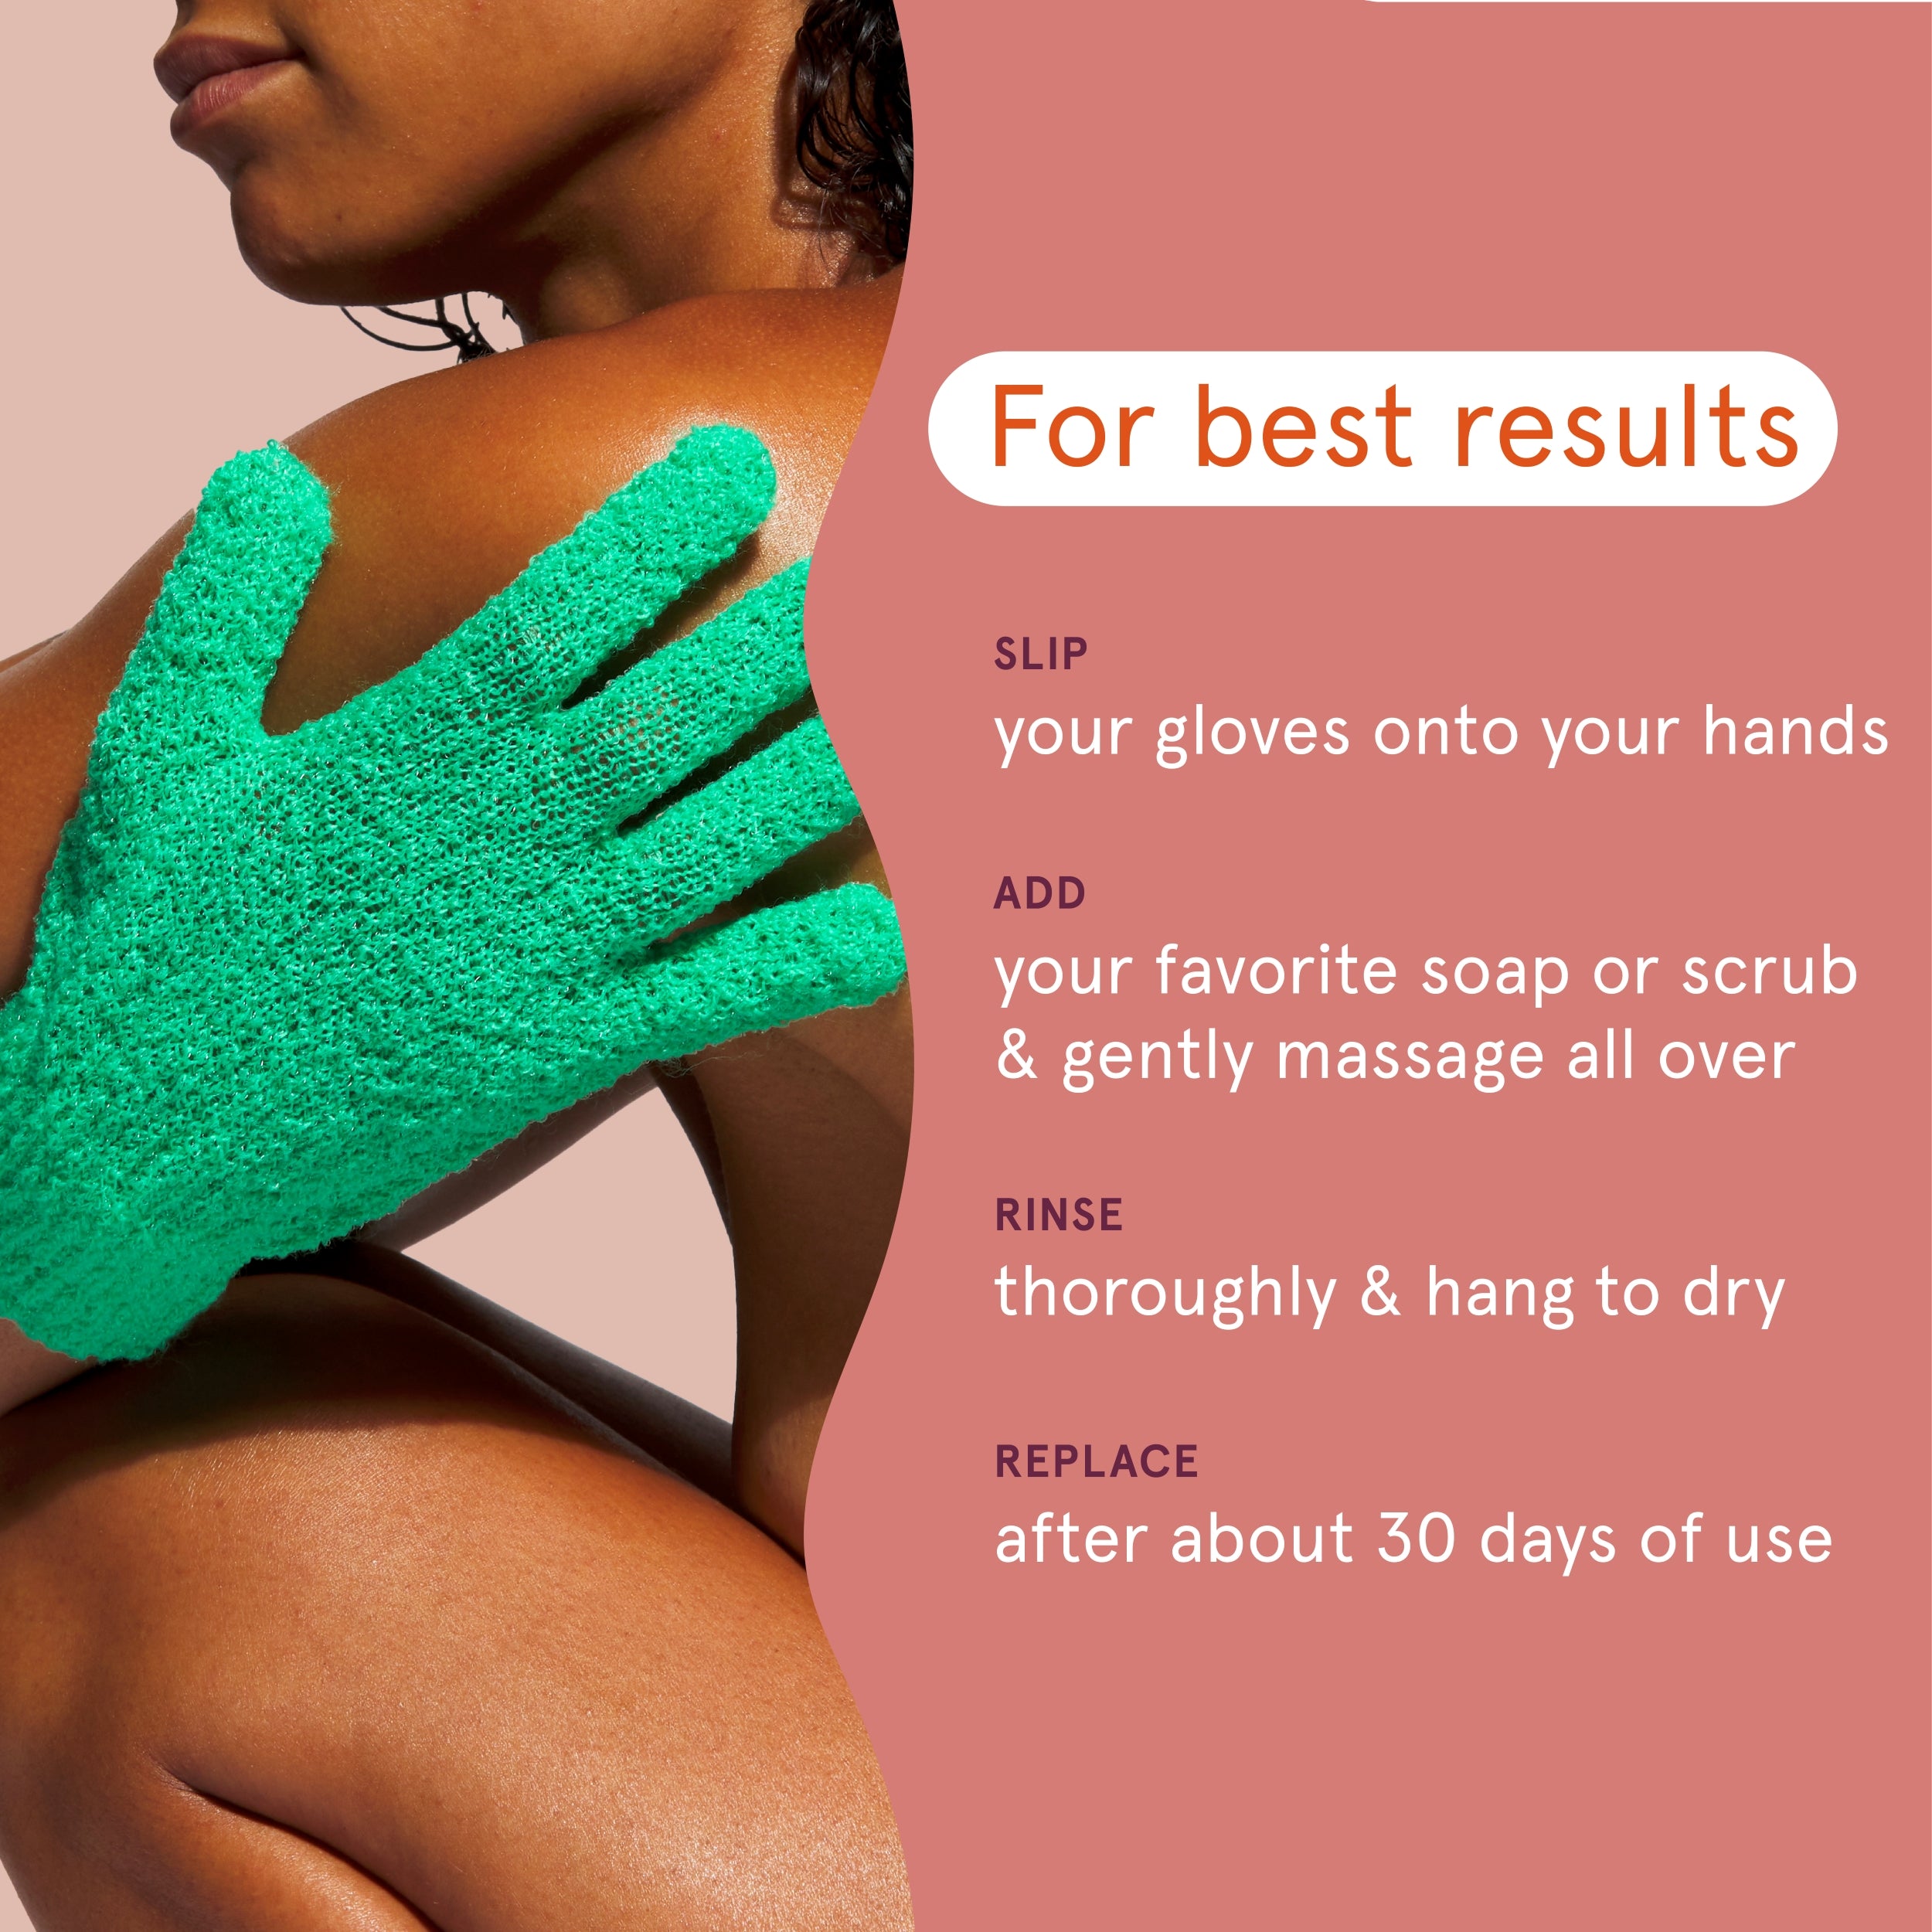 Bath and Body Exfoliating Body Gloves, Assorted Colors, 3 Pair - 6 Count